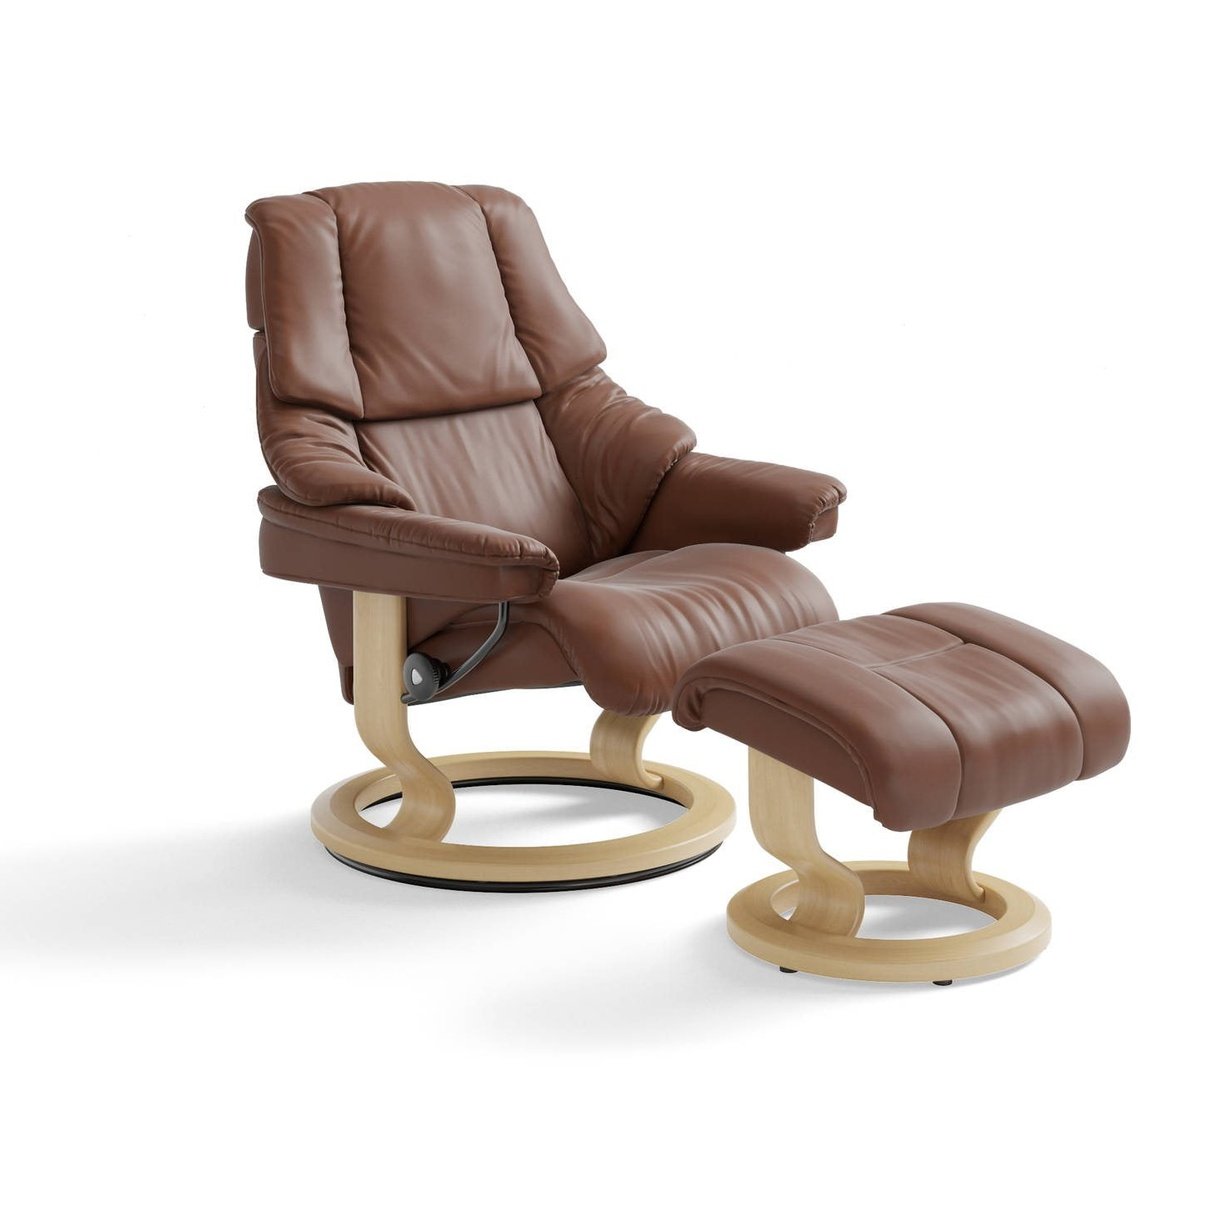 Stressless Reno Small Recliner with Stool